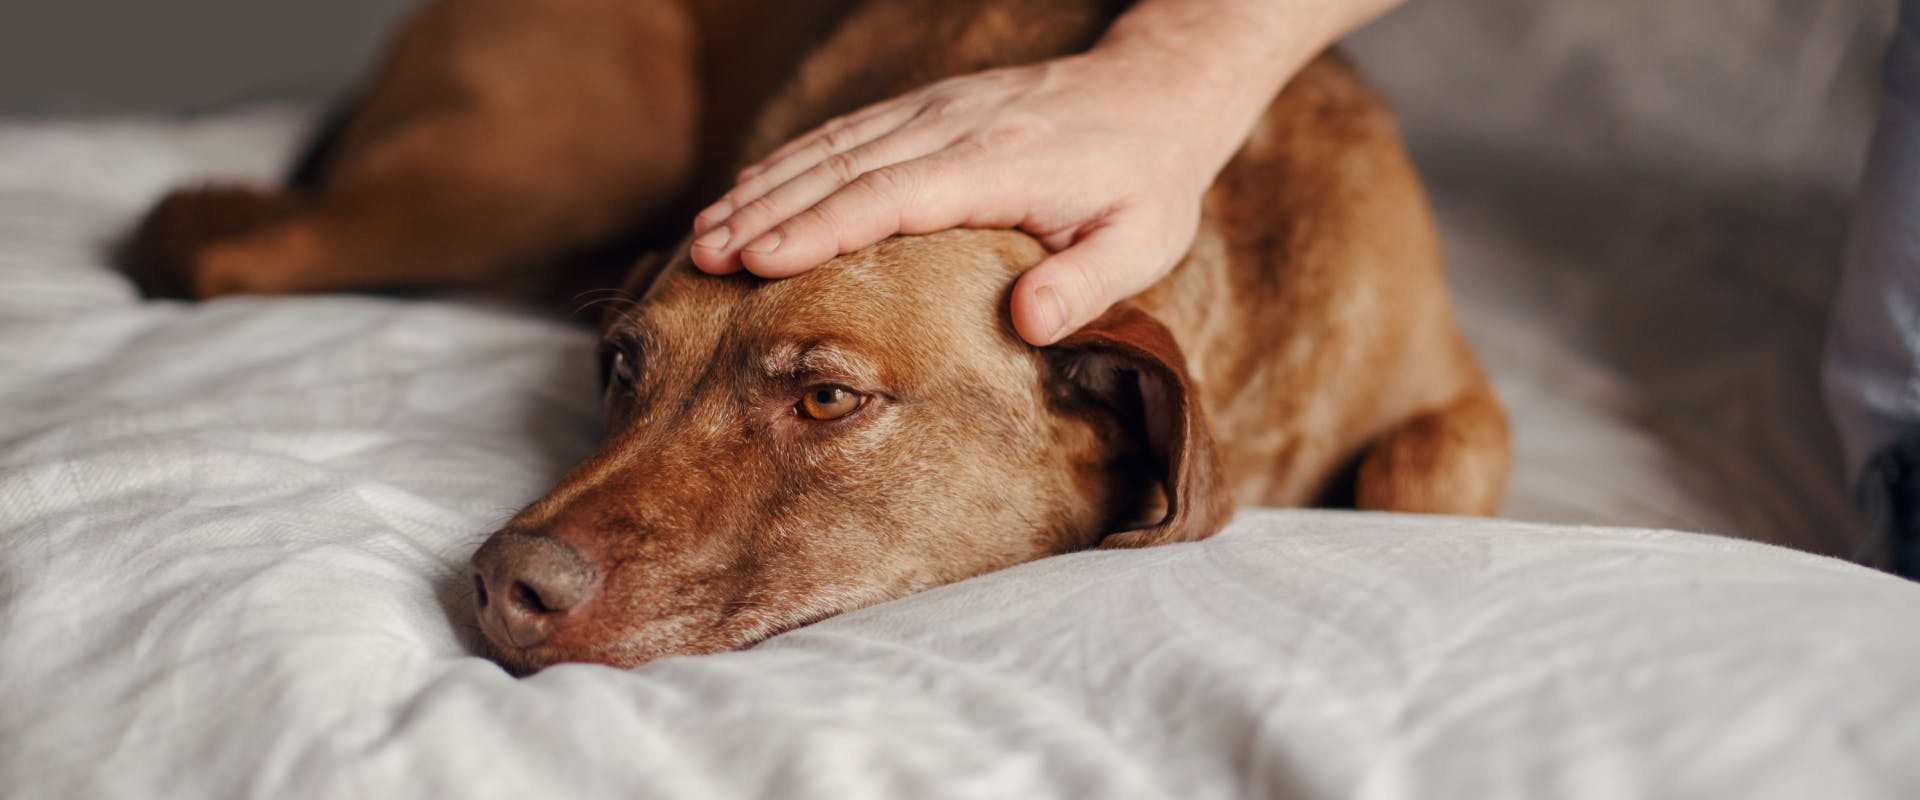 a brown dog lying on a gray duvet while a person pat's their head